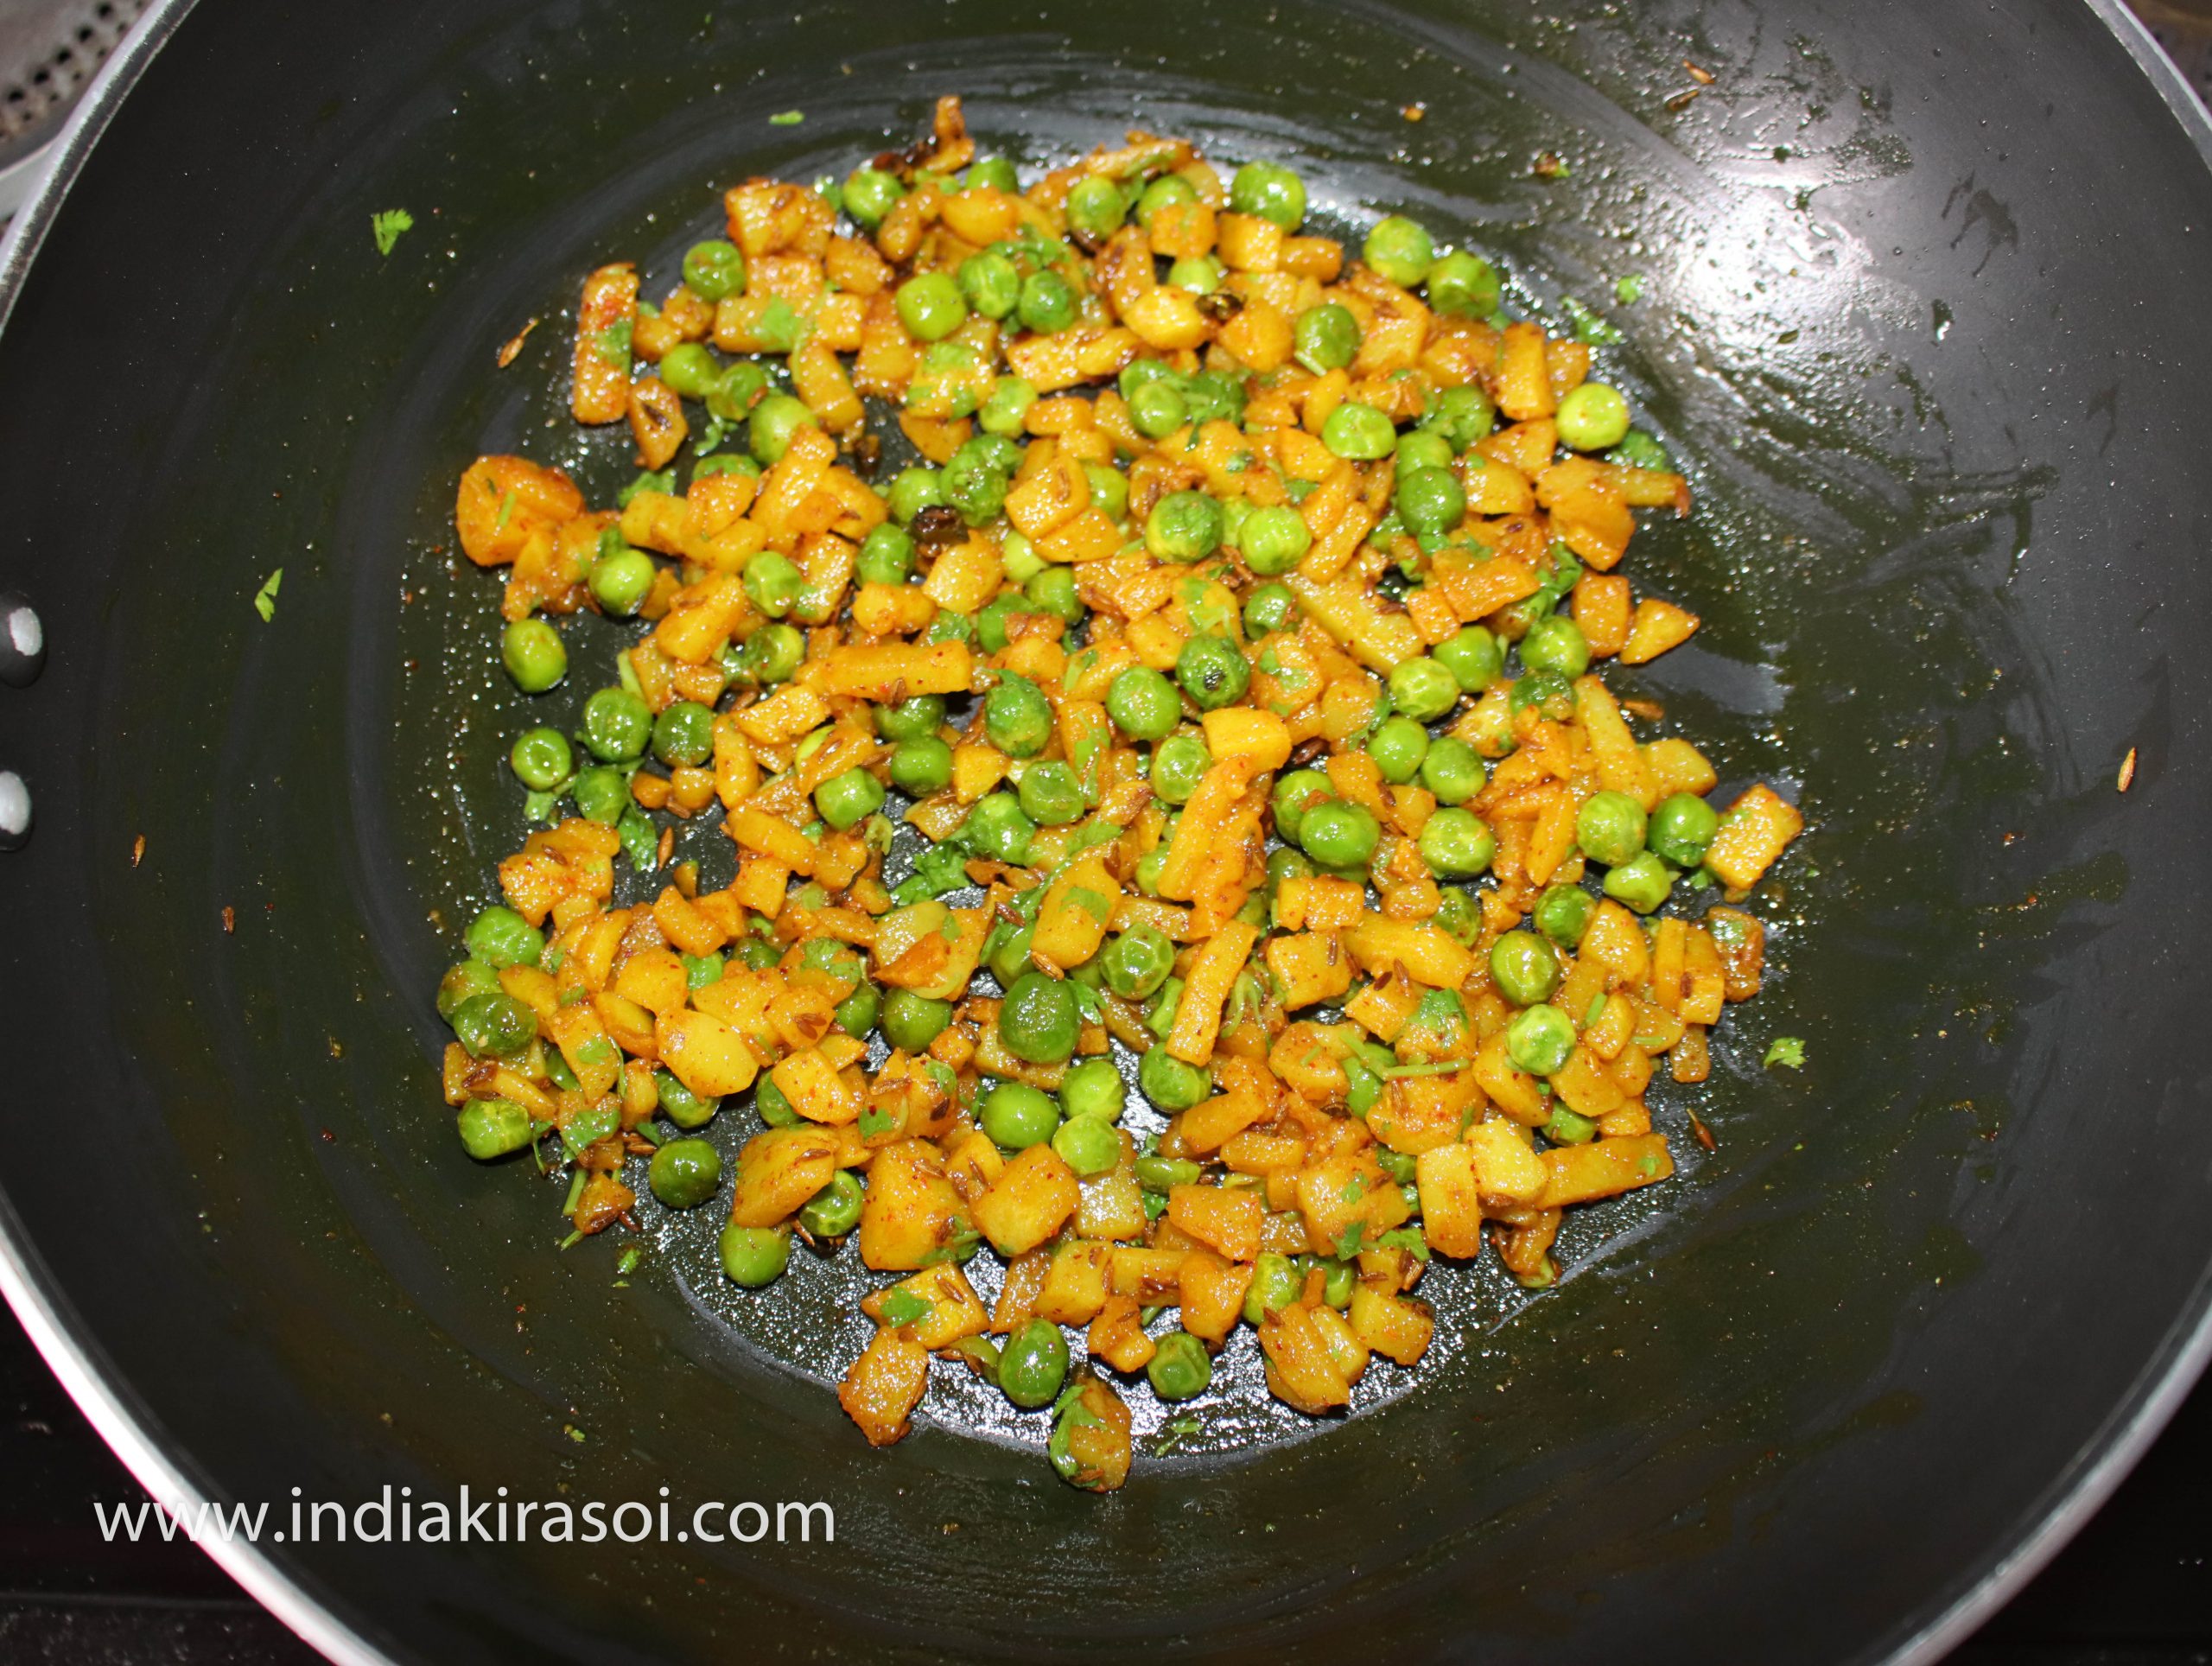 Mix coriander leaves with the curry. Aloo matar sukhi sabji is ready. Switch off the gas.